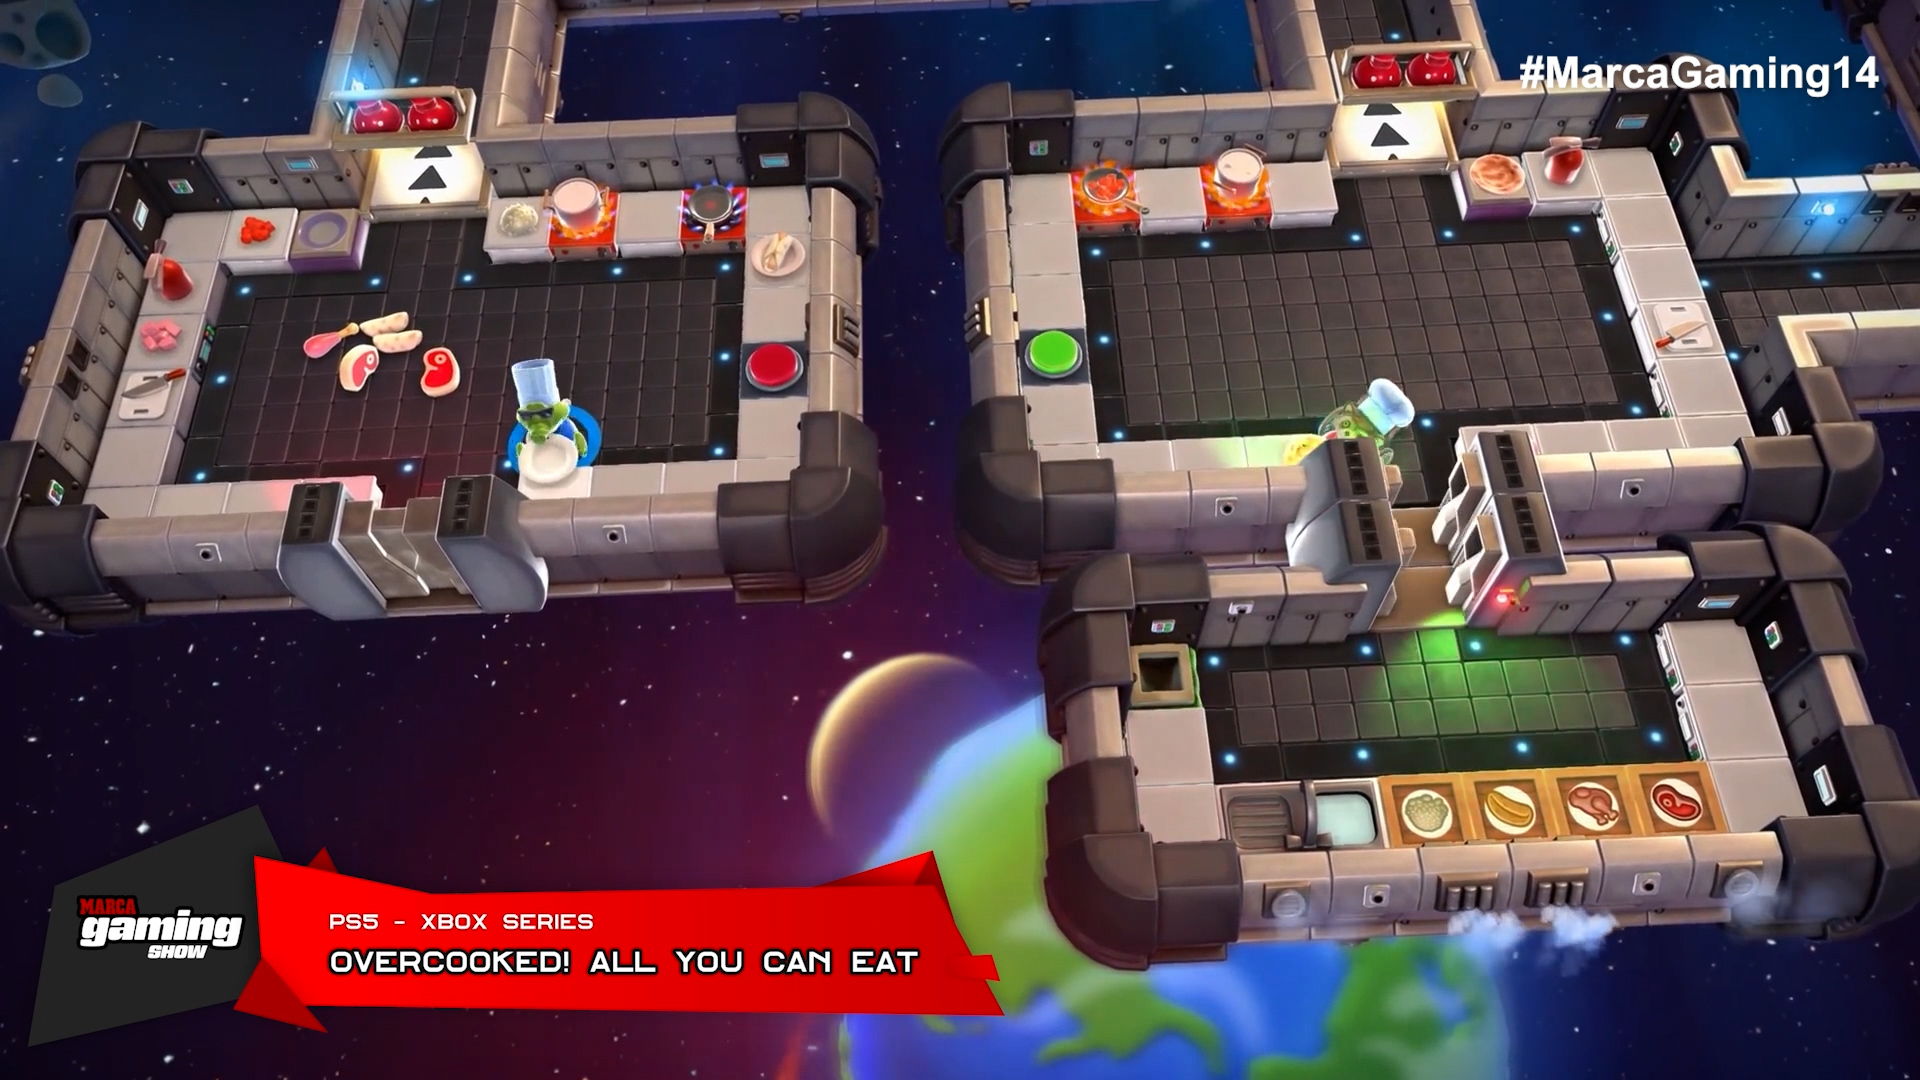 Overcooked All You Can It! (PS5 - XBOX SERIES)